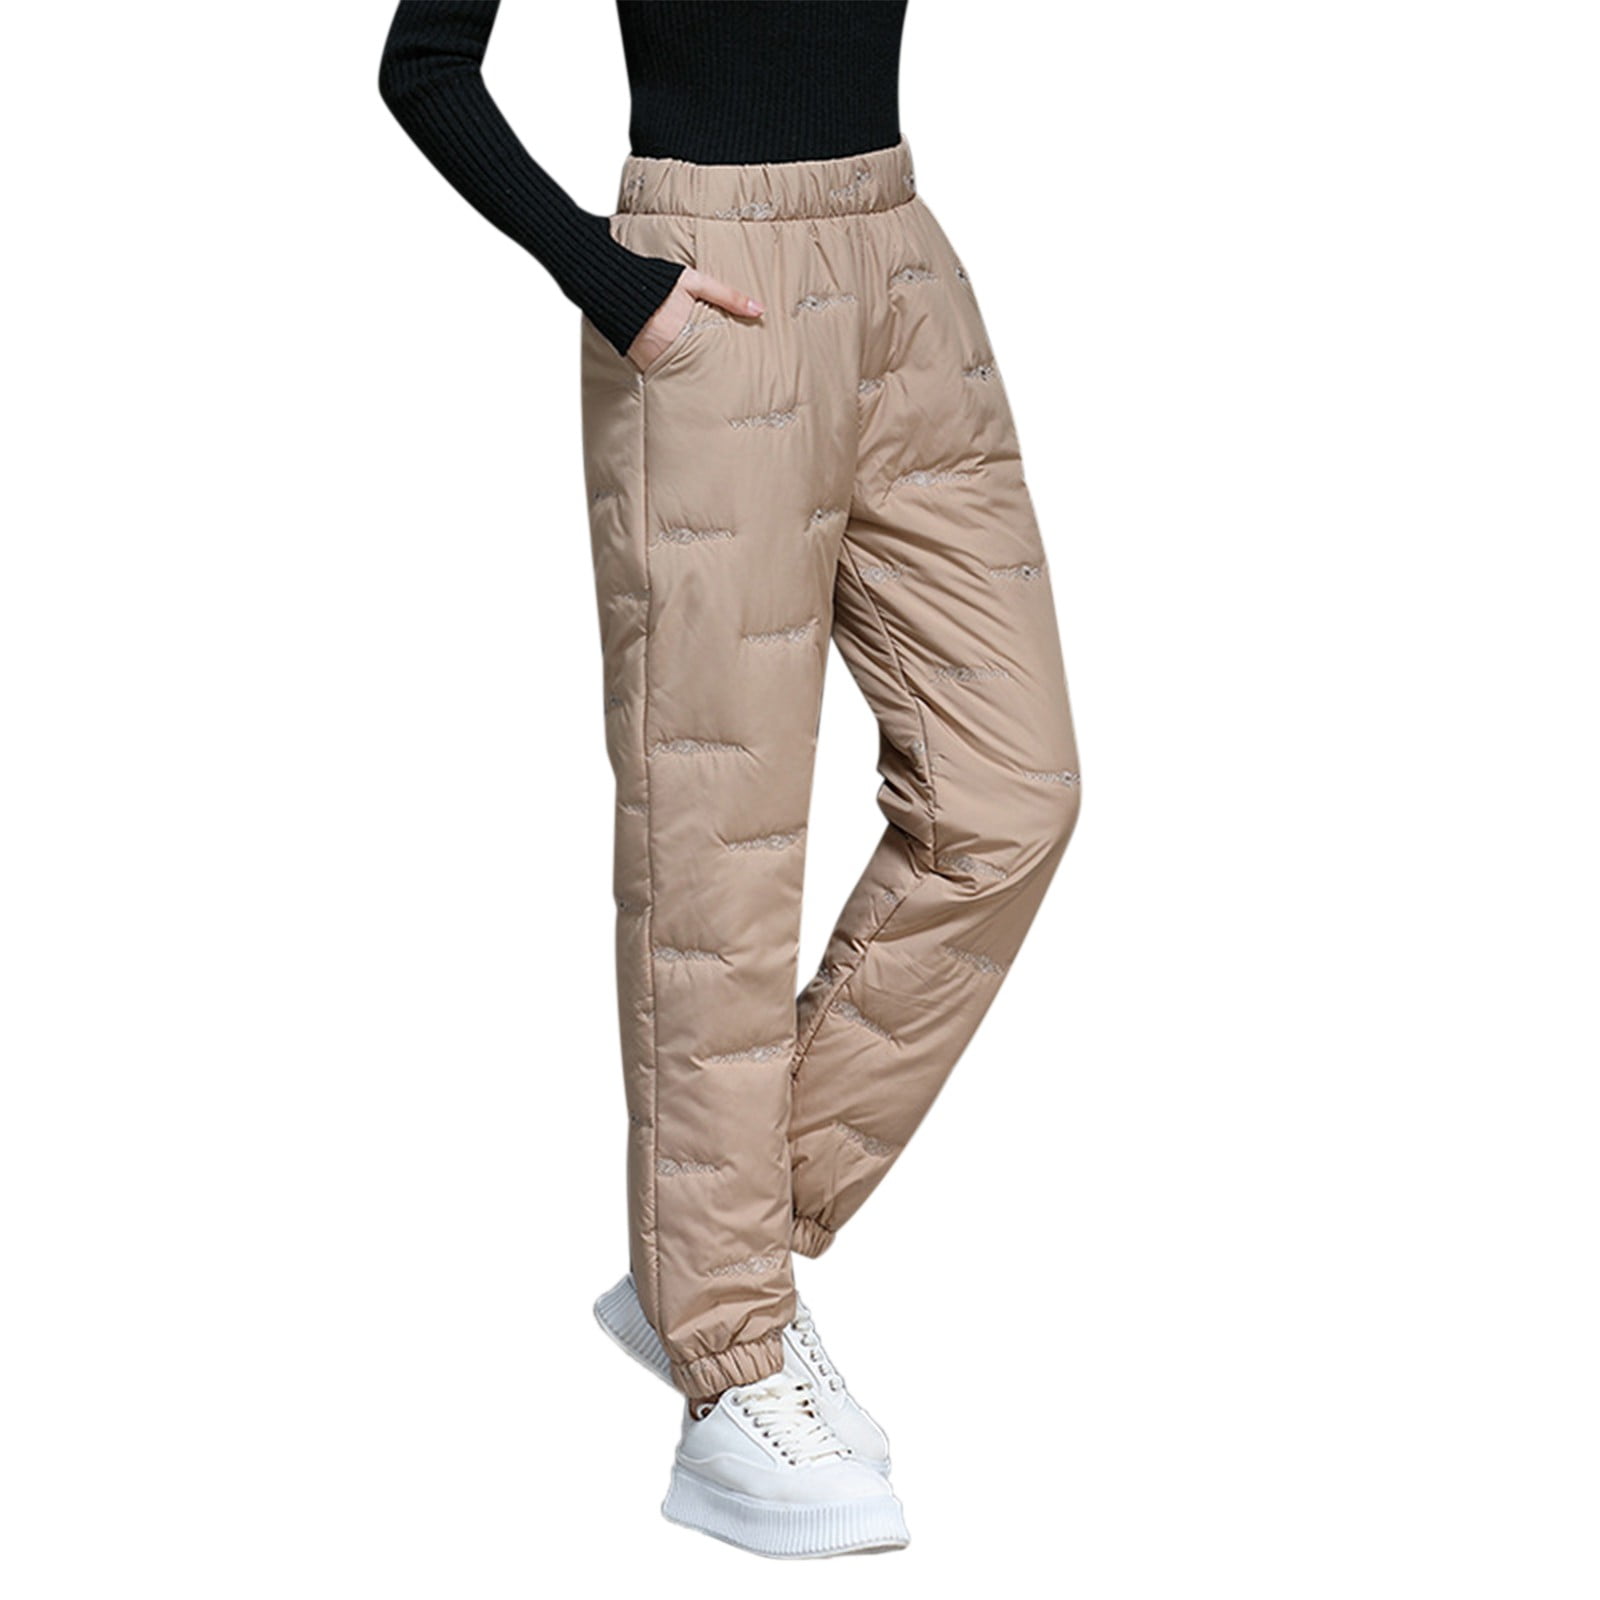 PEASKJP Pajama Pants For Women Women's Wide Band Pull-on Relaxed Leg Pant  with Tummy Control - Walmart.com